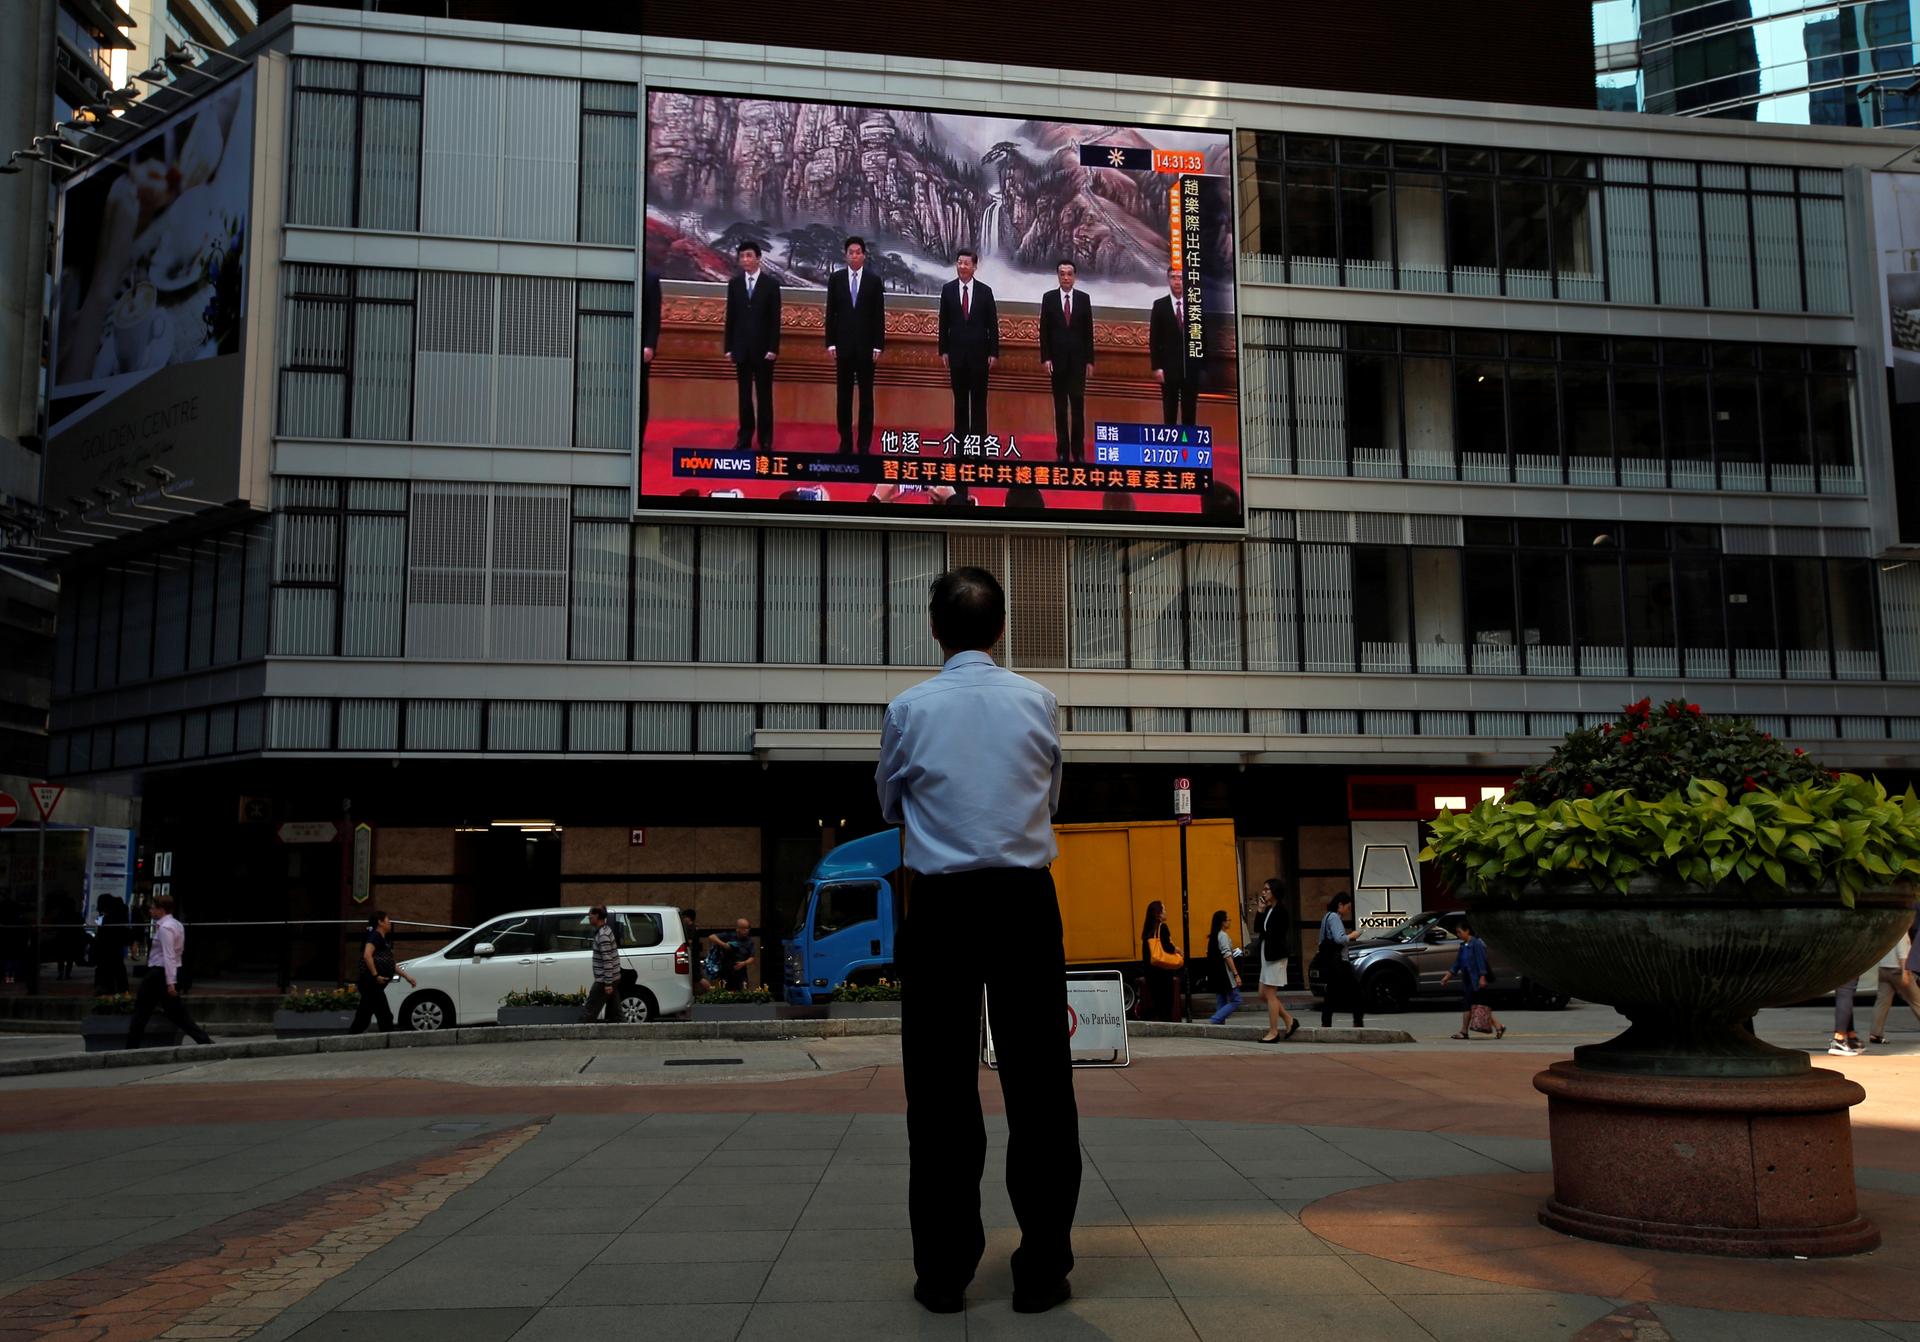 A man watches a news broadcast of China's President Xi Jinping and other new Politburo Standing Committee members attending a meeting in Beijing, outside a commercial building in Hong Kong.